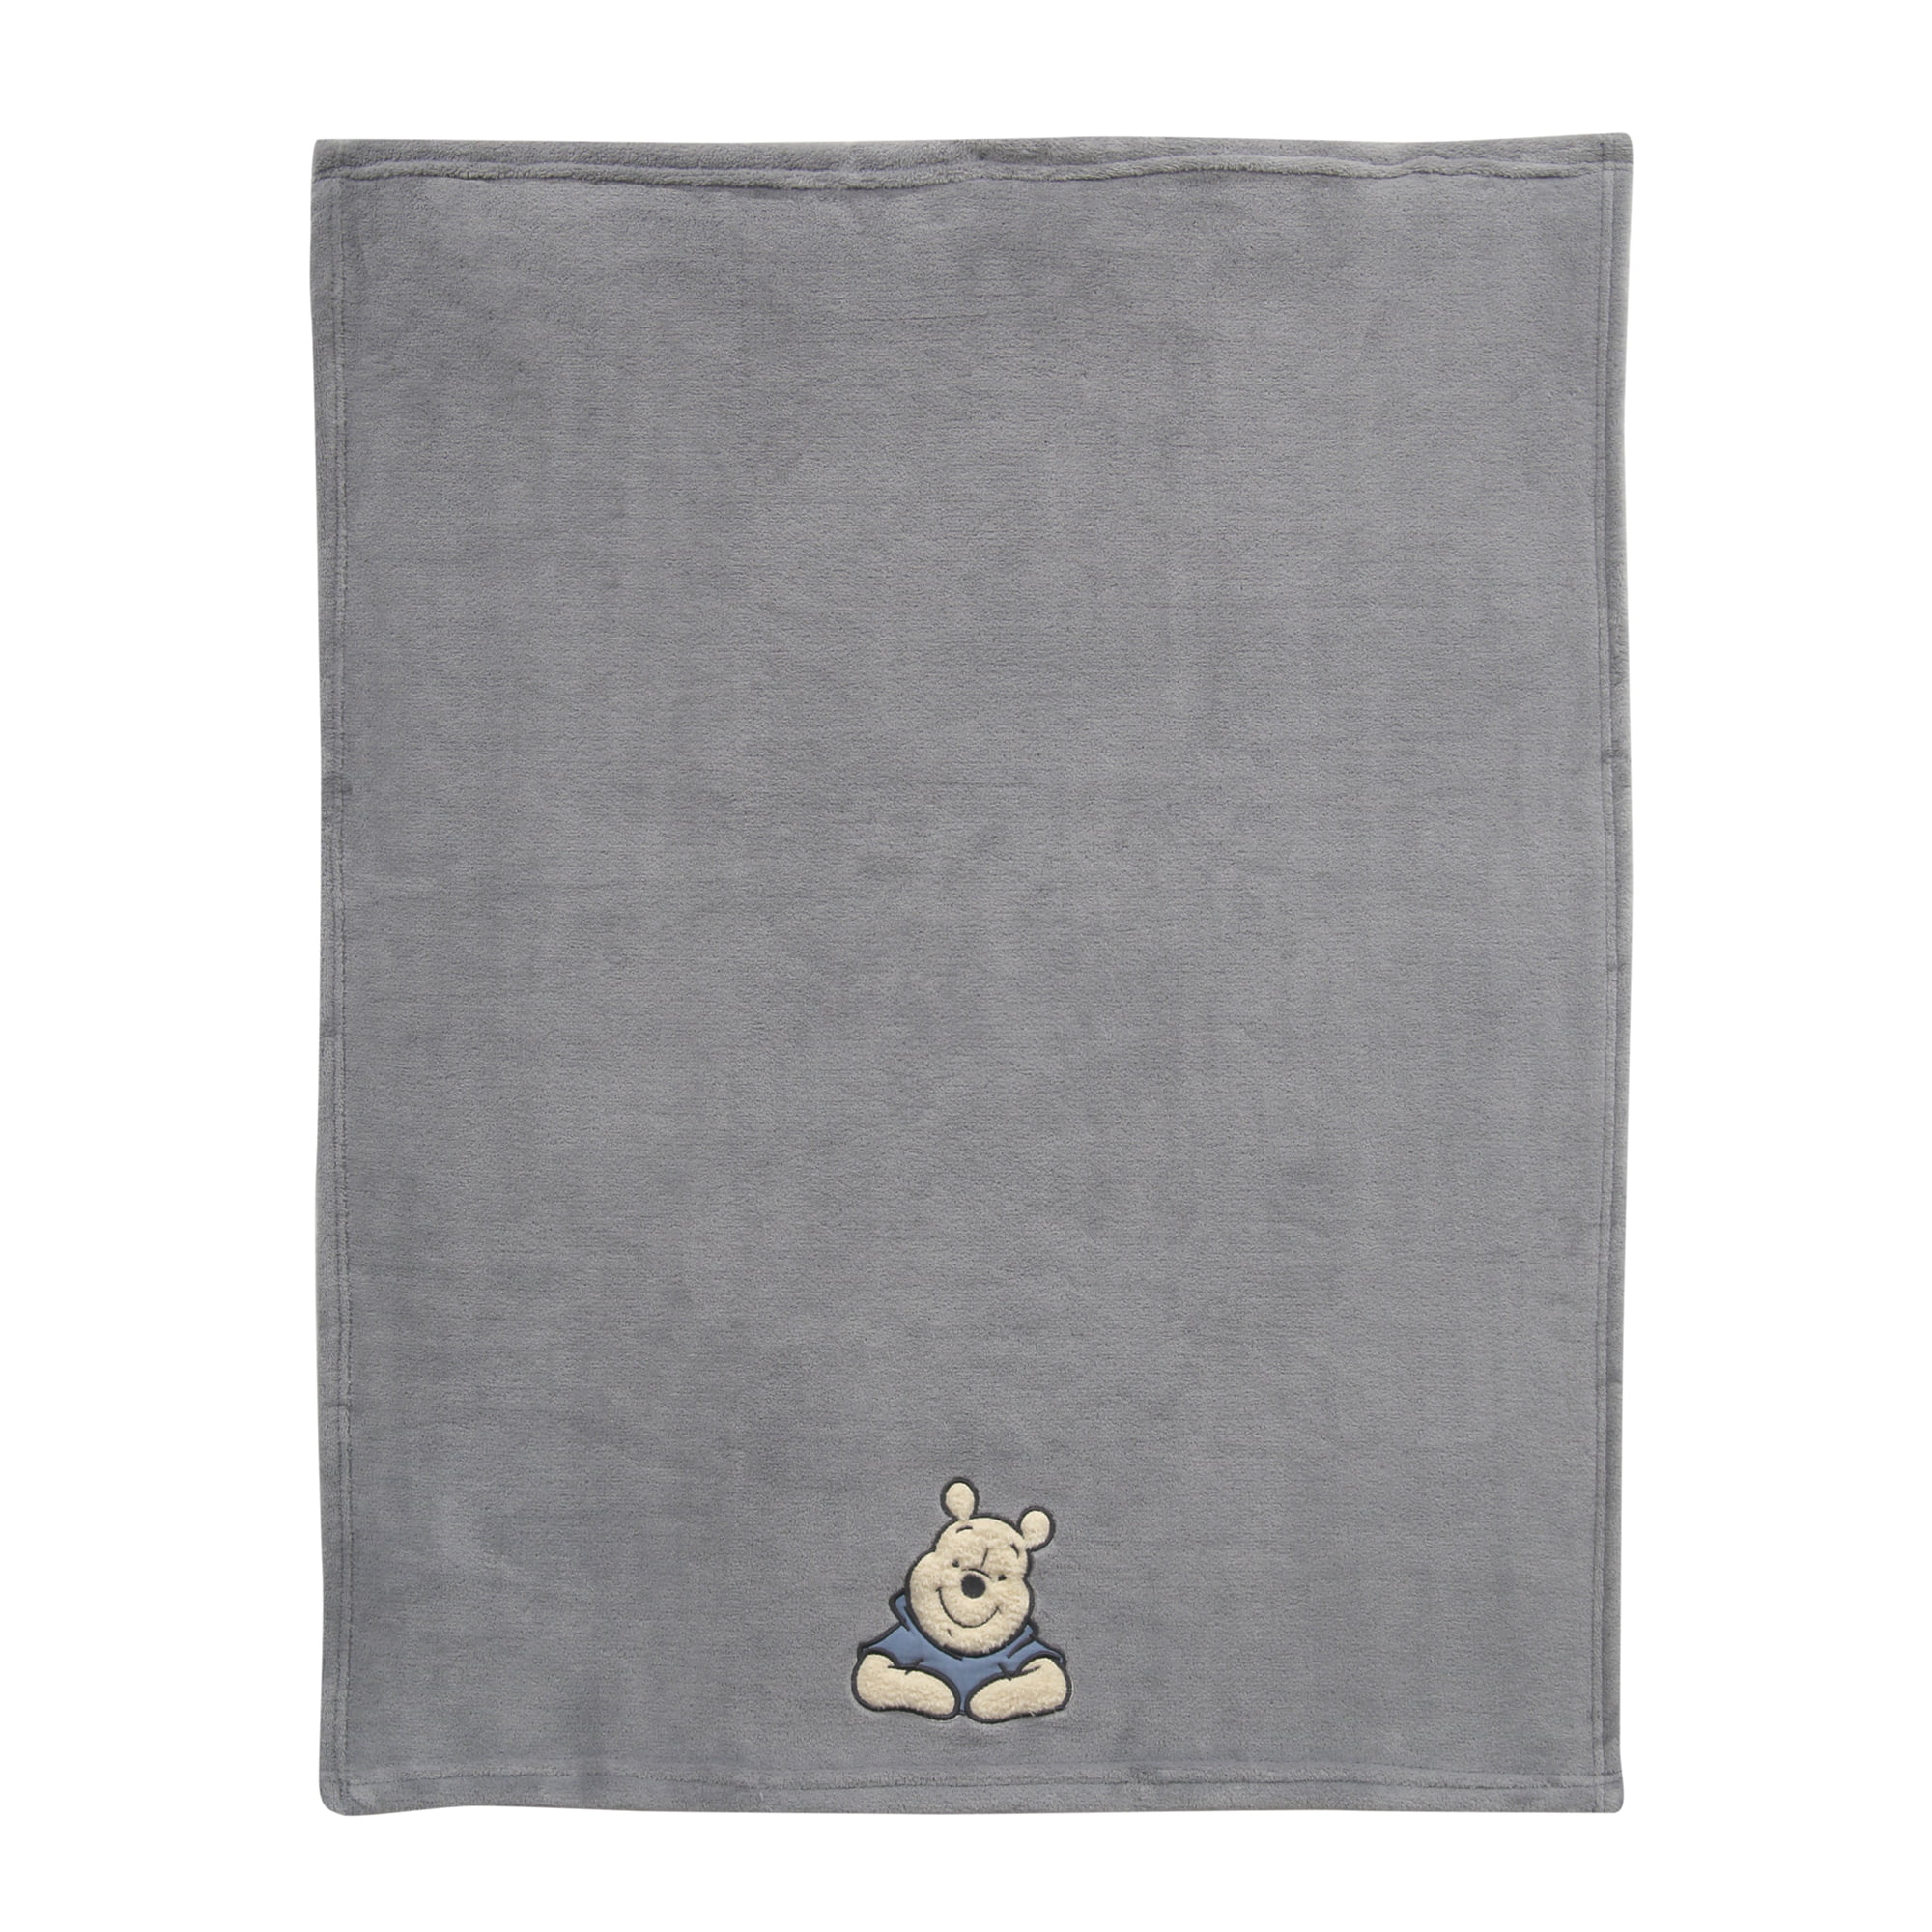 Lambs & Ivy Forever Pooh Baby Blanket - image 4 of 5